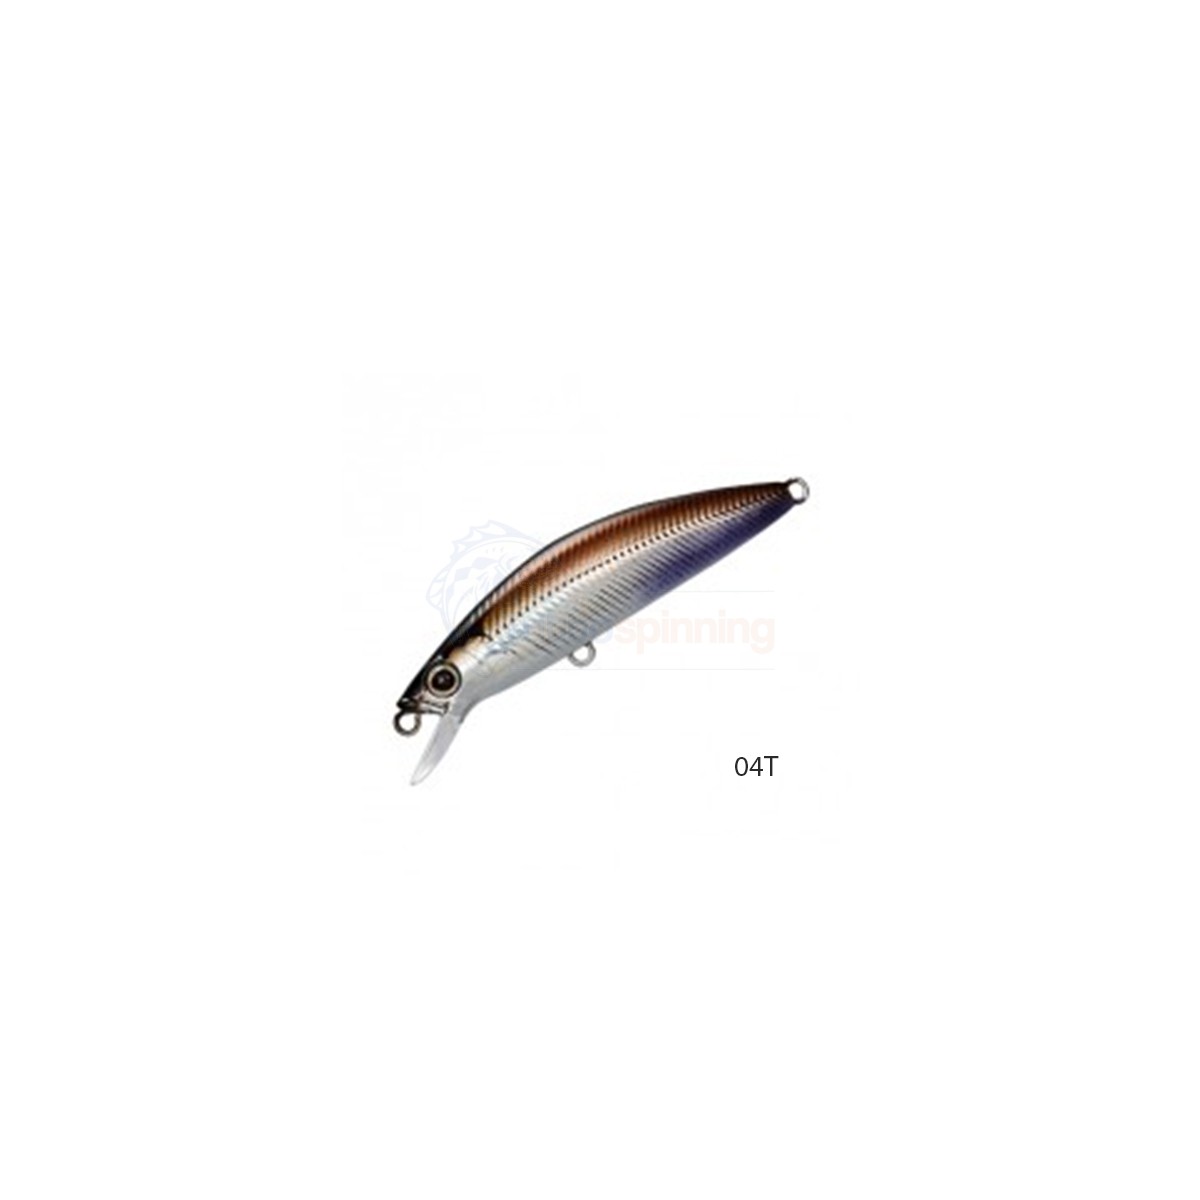 Fishing lure Shimano Cardiff Folletta 50SS - Nootica - Water addicts, like  you!